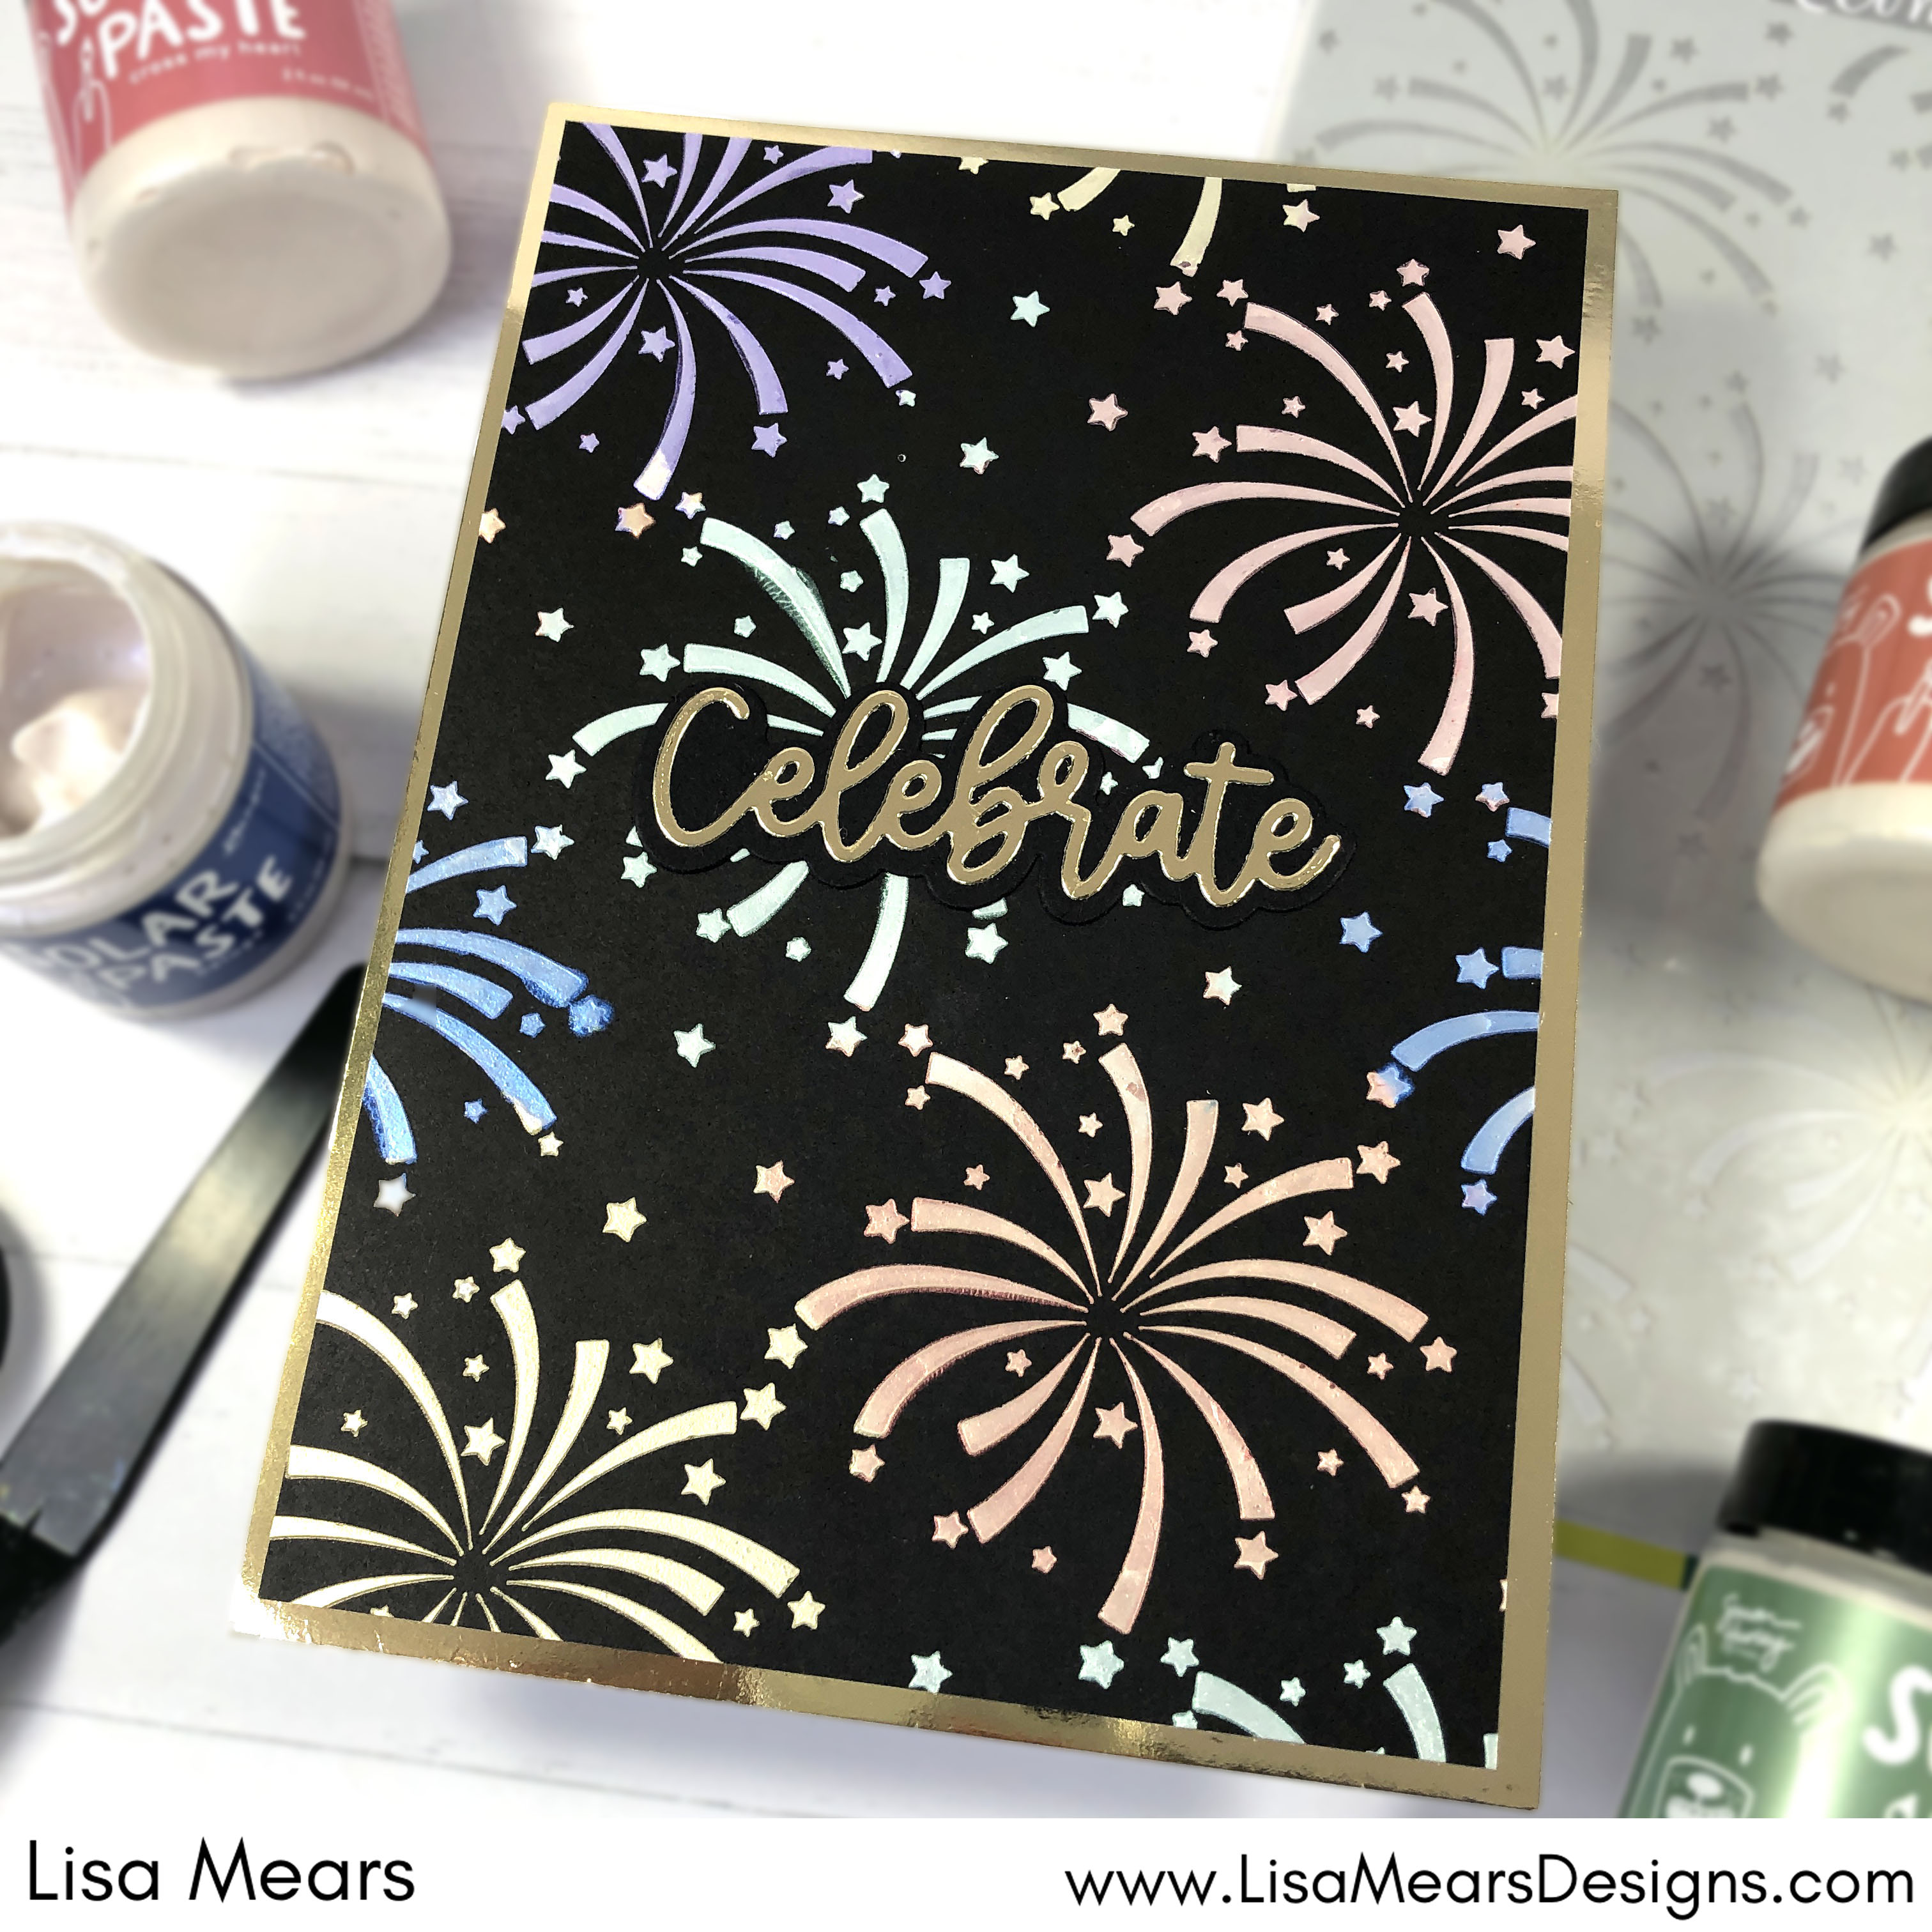 Simon Hurley's Lunar Paste – New Colors PLUS 6 ways to use Lunar Paste to  Make Cards – Lisa Mears Designs